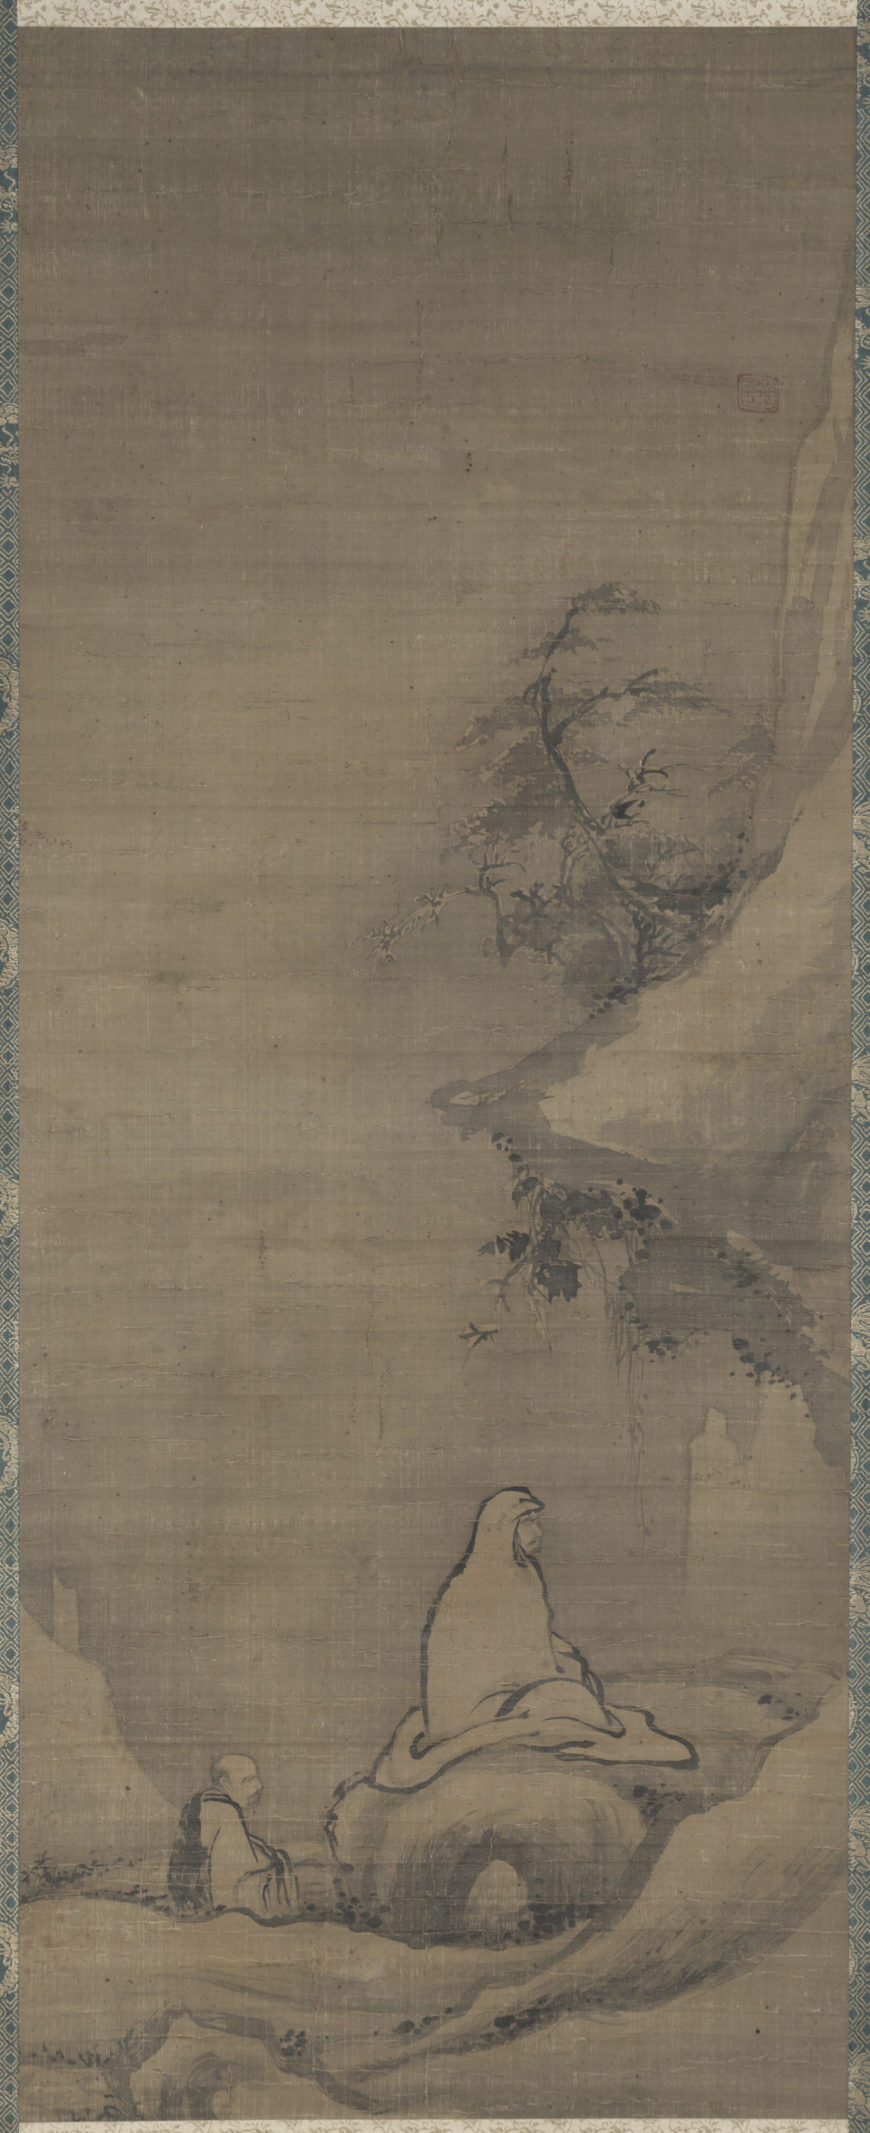 Anonymous, Bodhidharma Meditating Facing a Cliff, late 13th century, hanging scroll, ink on silk, 203.2 x 63.5 cm (The Cleveland Museum of Art)